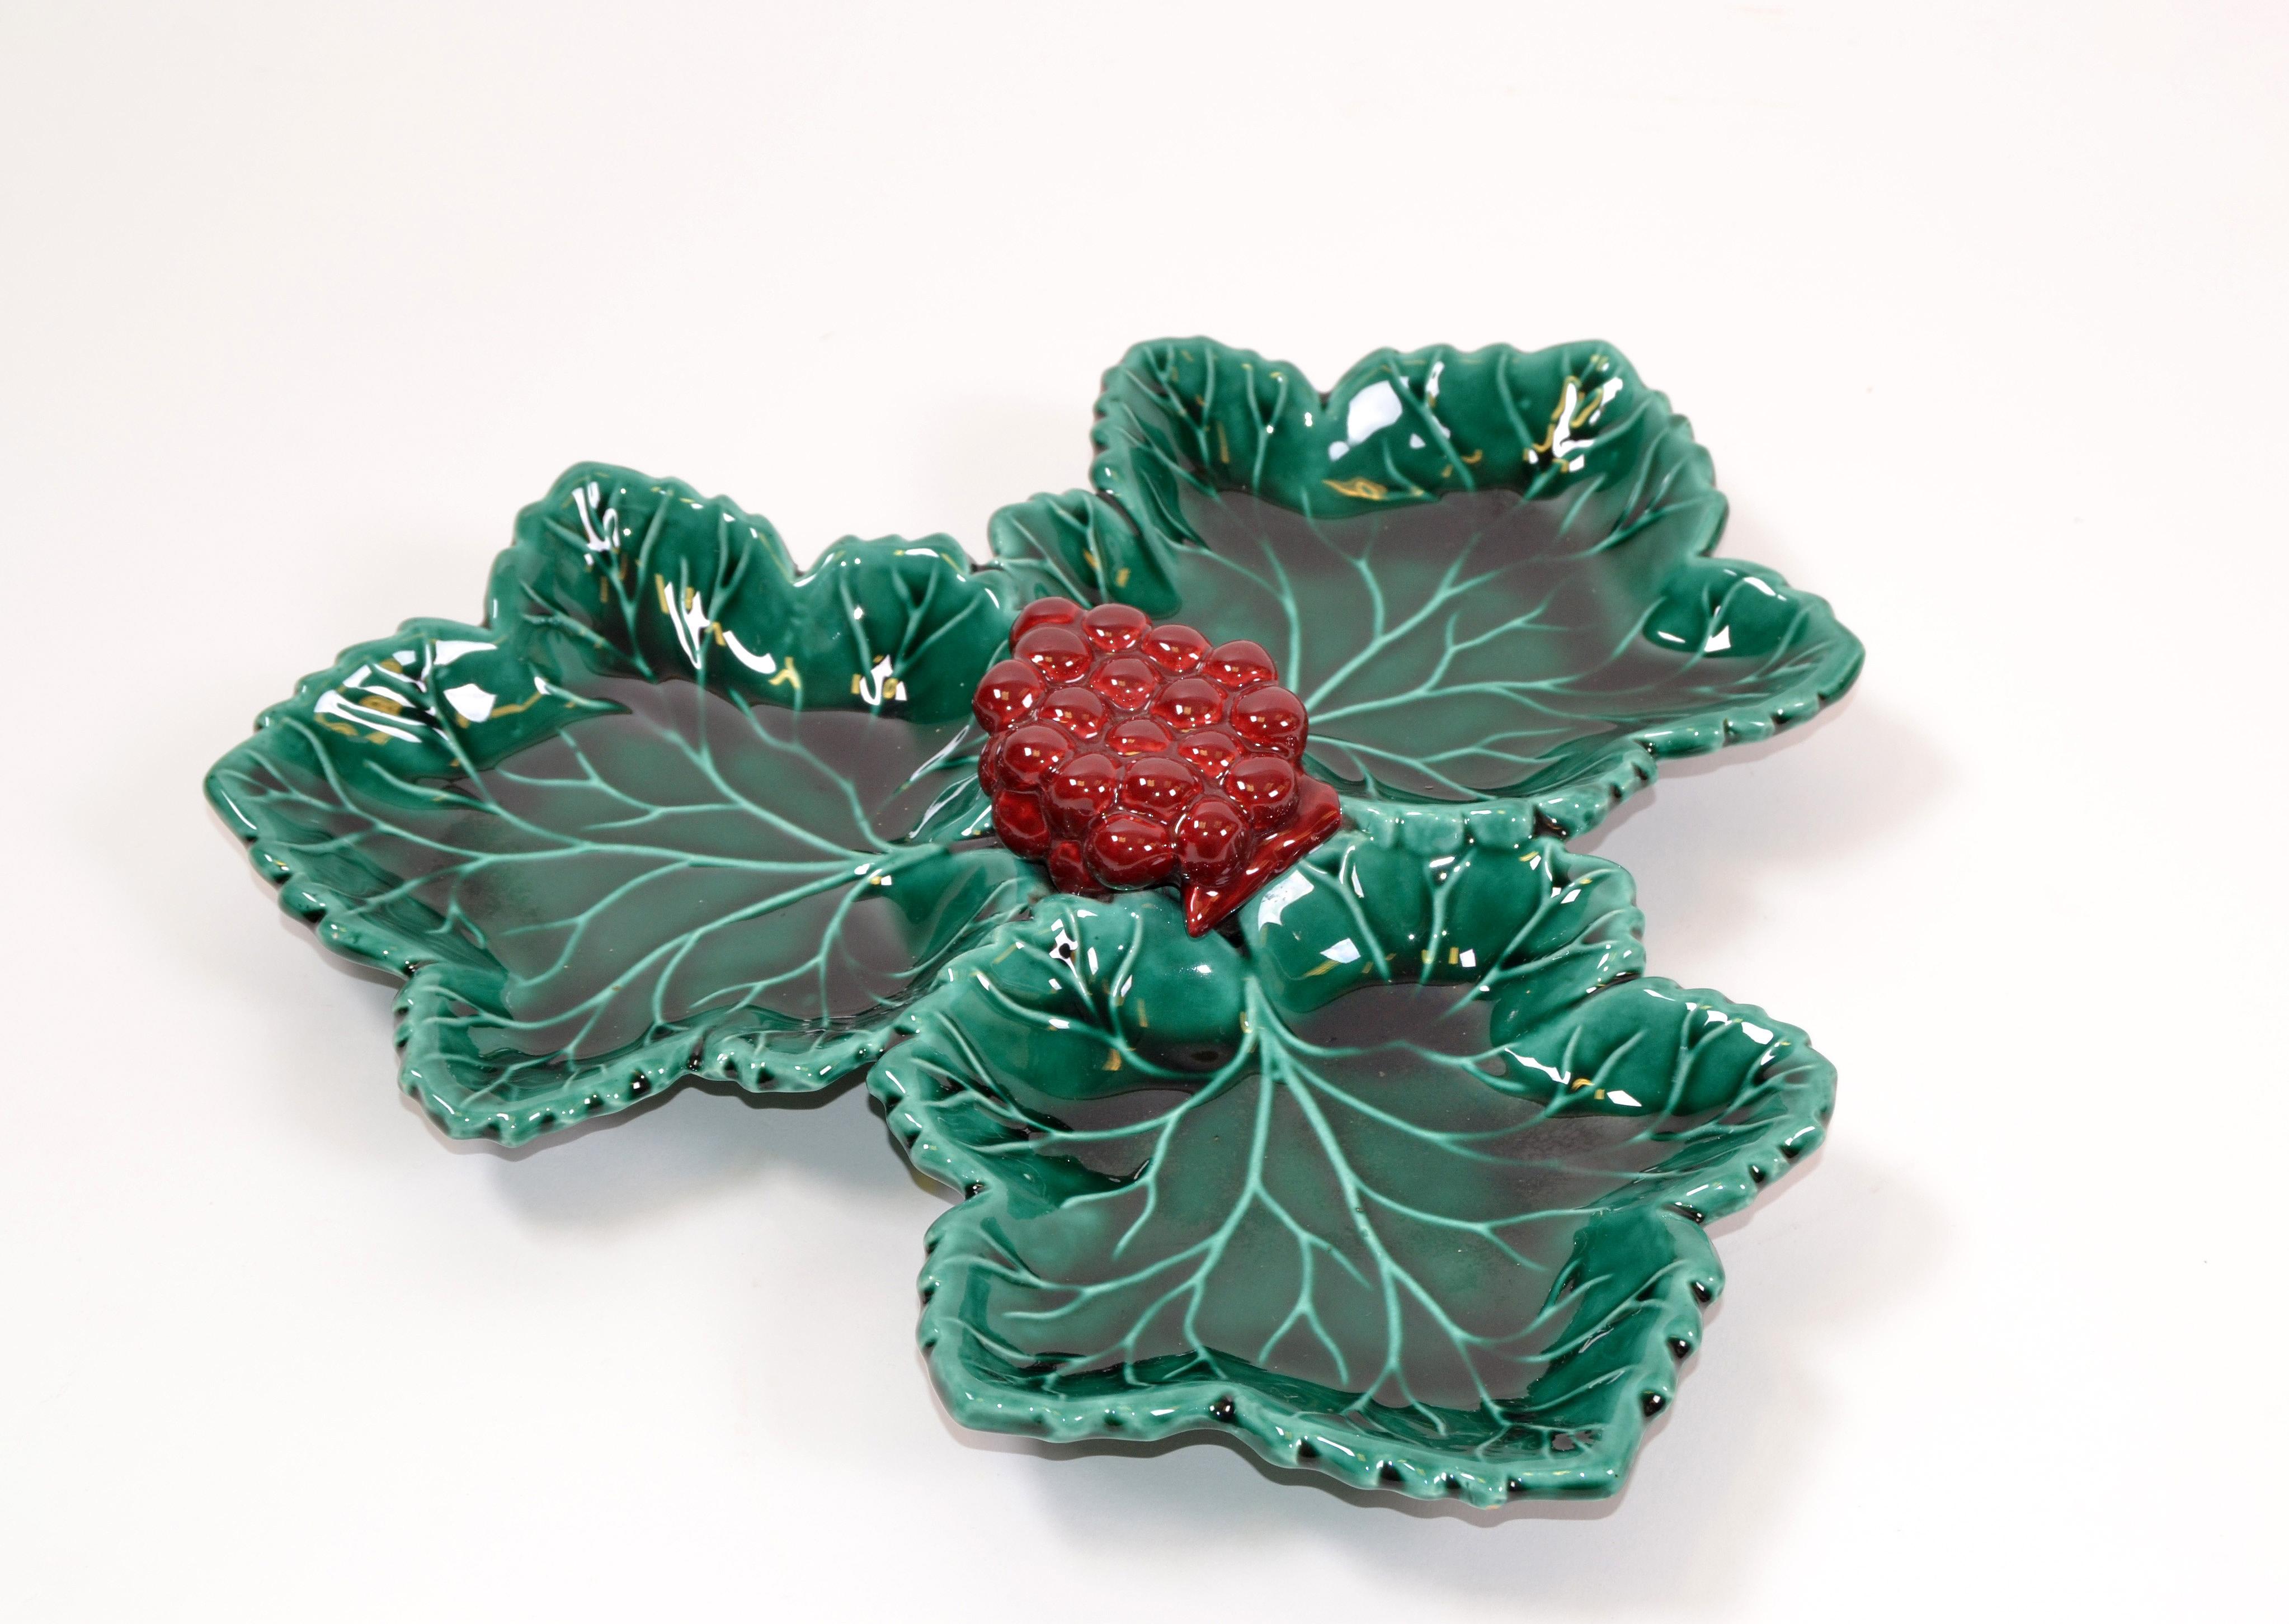 Vallauris French Glazed Grapes & Vine Leaves Ceramic Serving Plate Green and Red For Sale 6